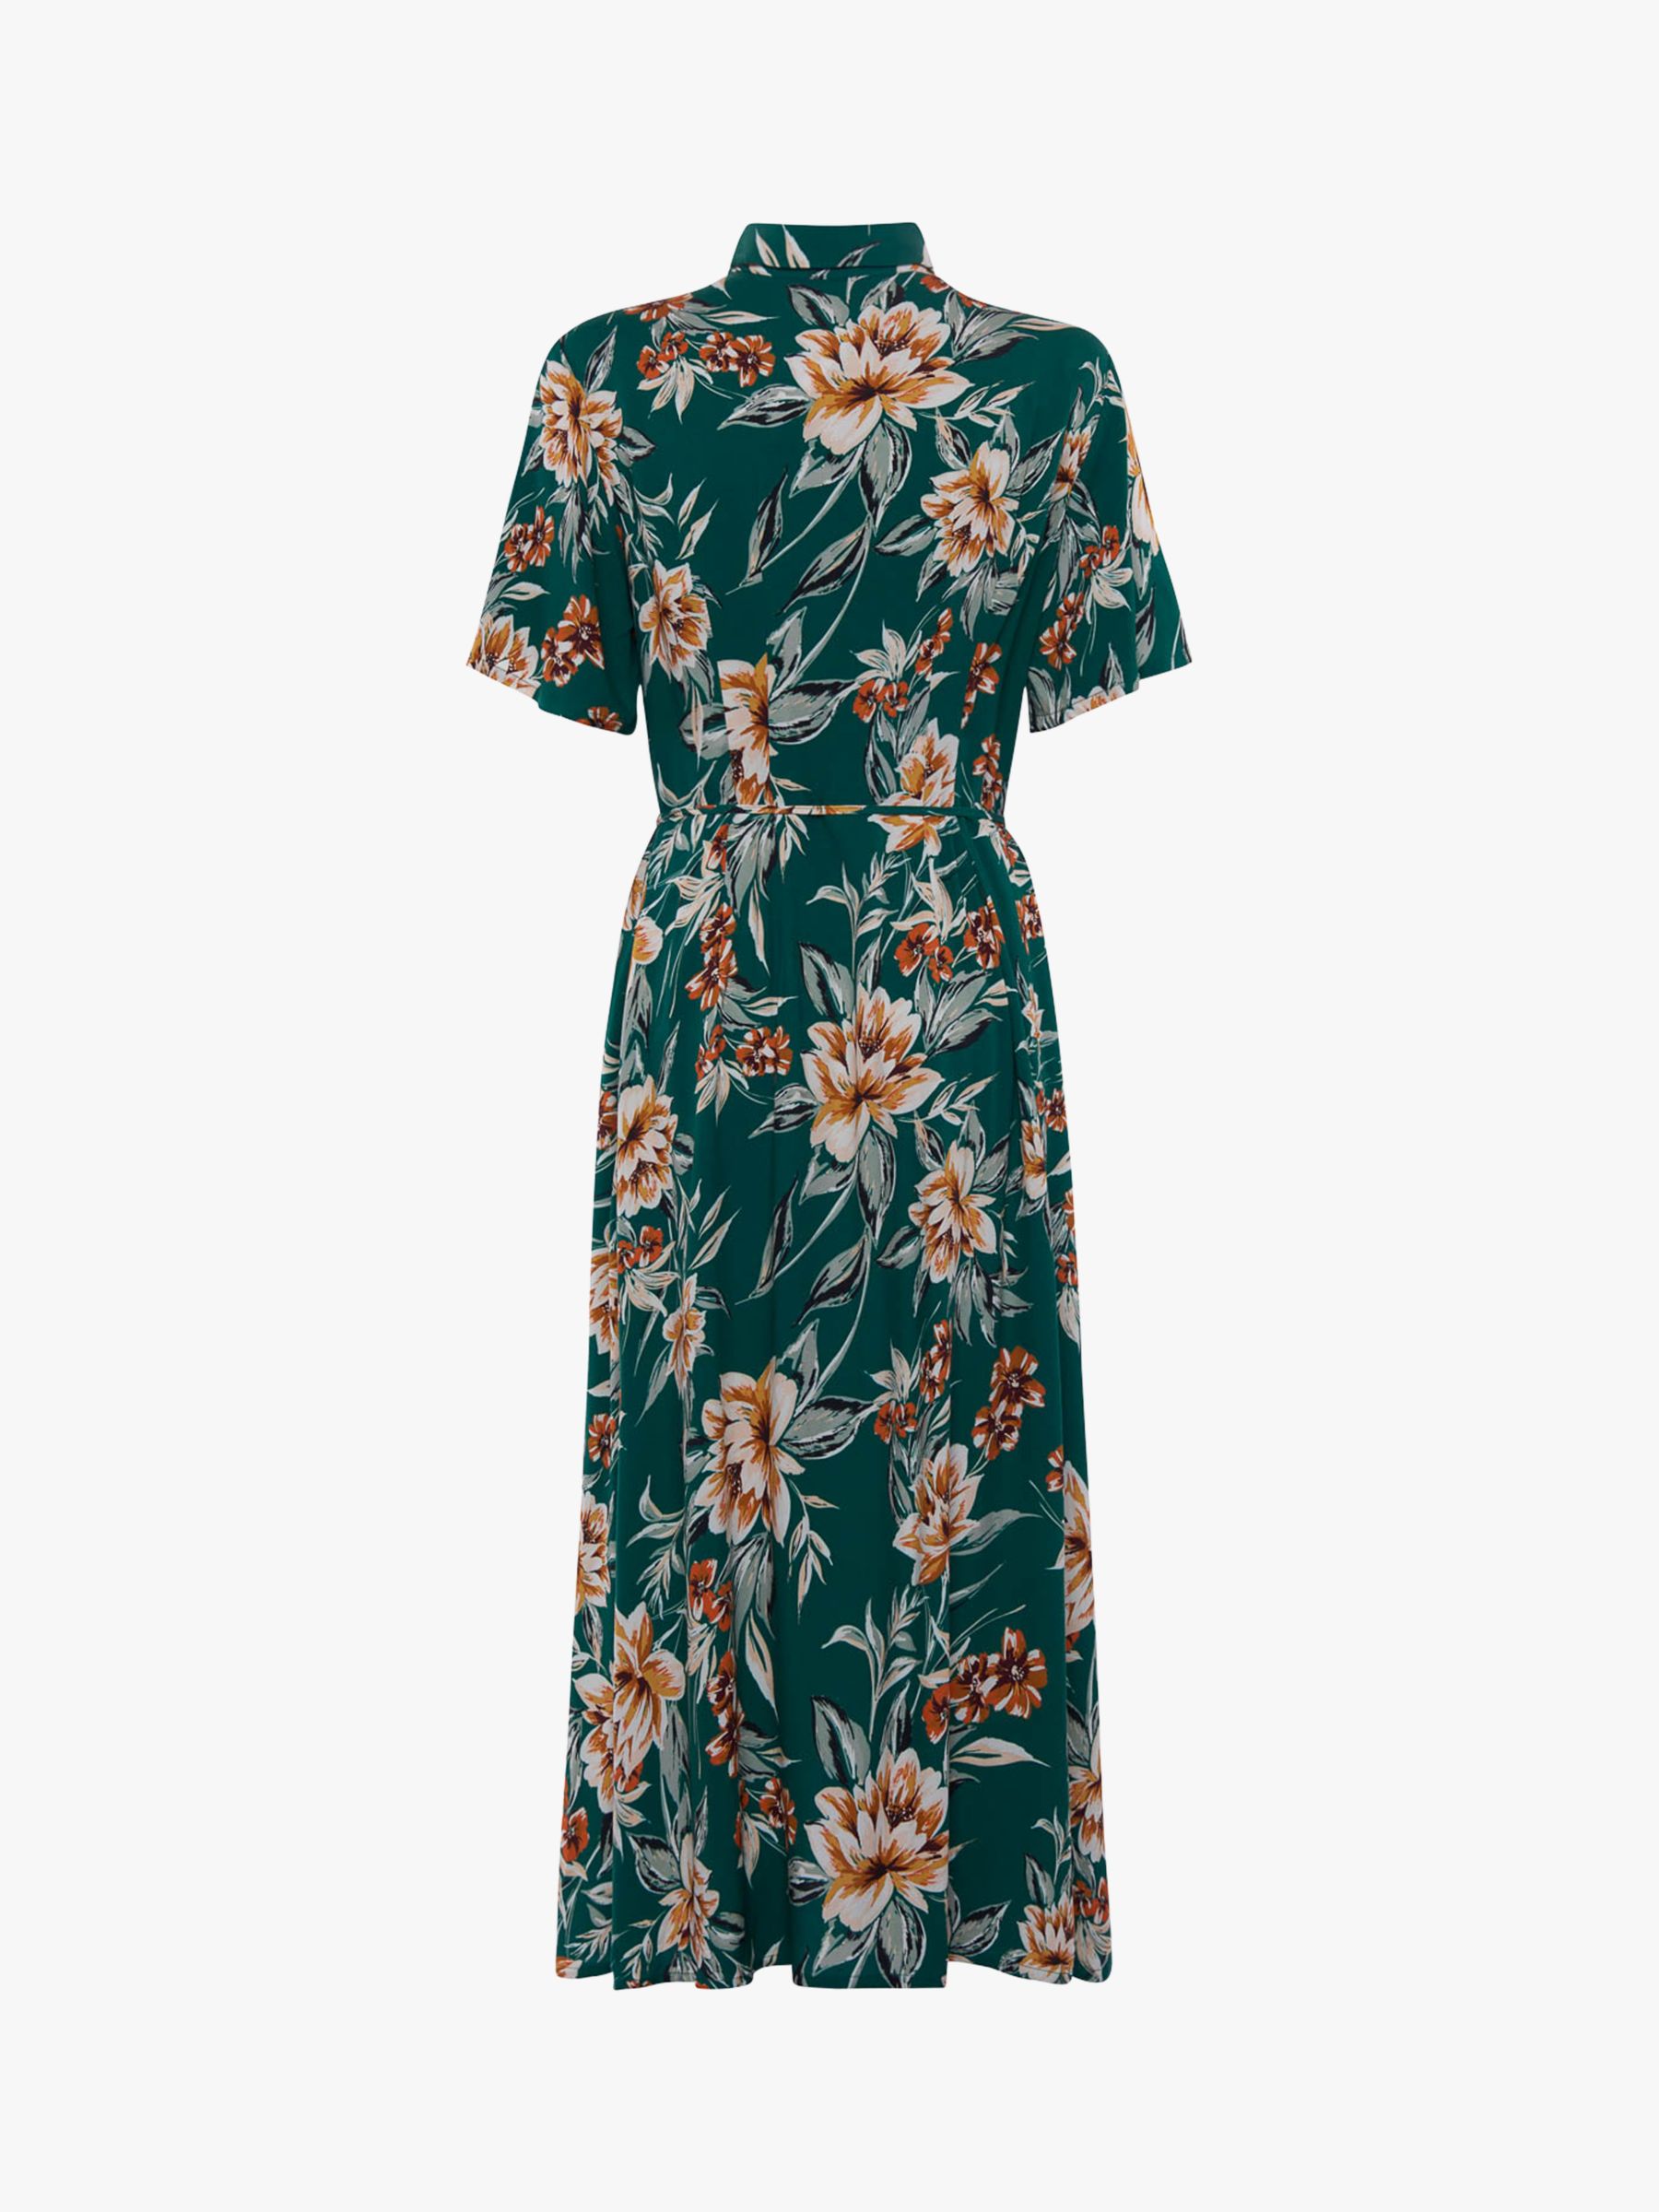 French Connection Claribel Floral Print Midi Dress, Evergreen/Multi